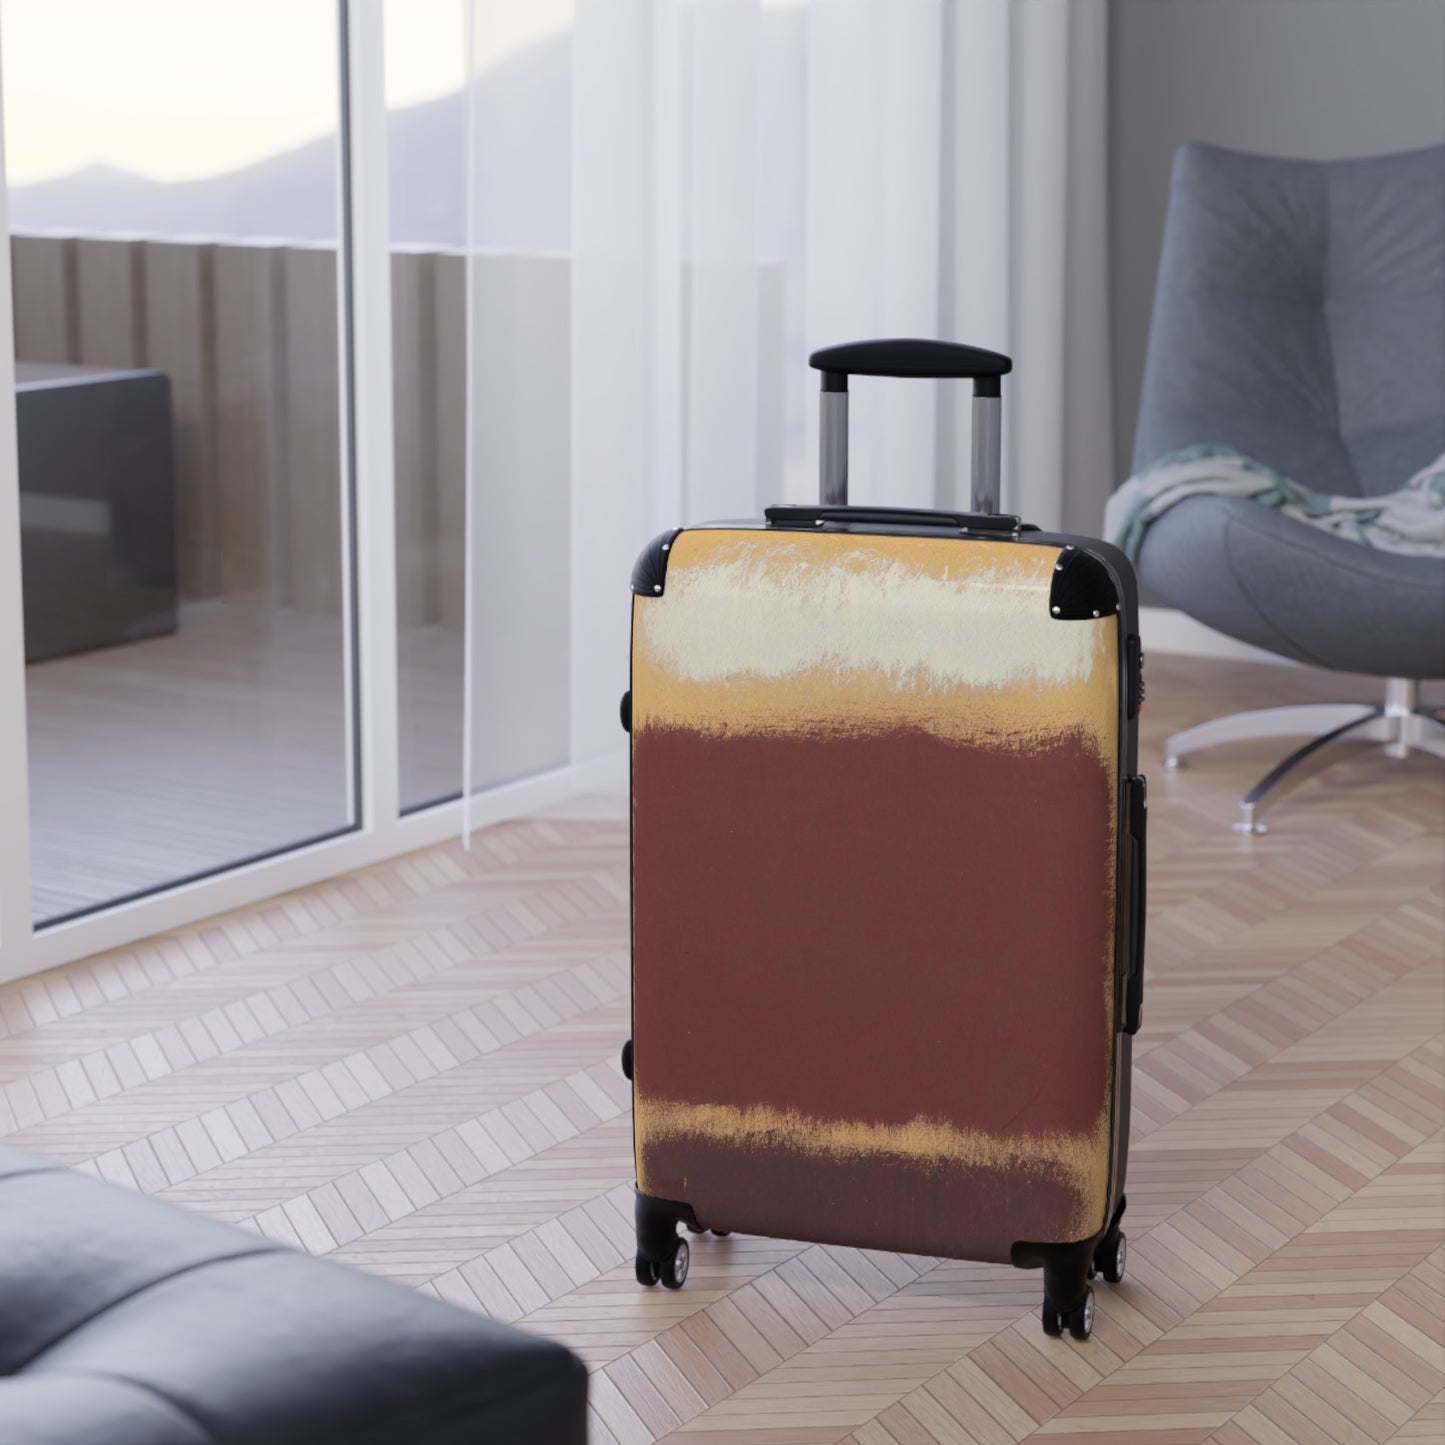 a piece of luggage sitting on top of a hard wood floor